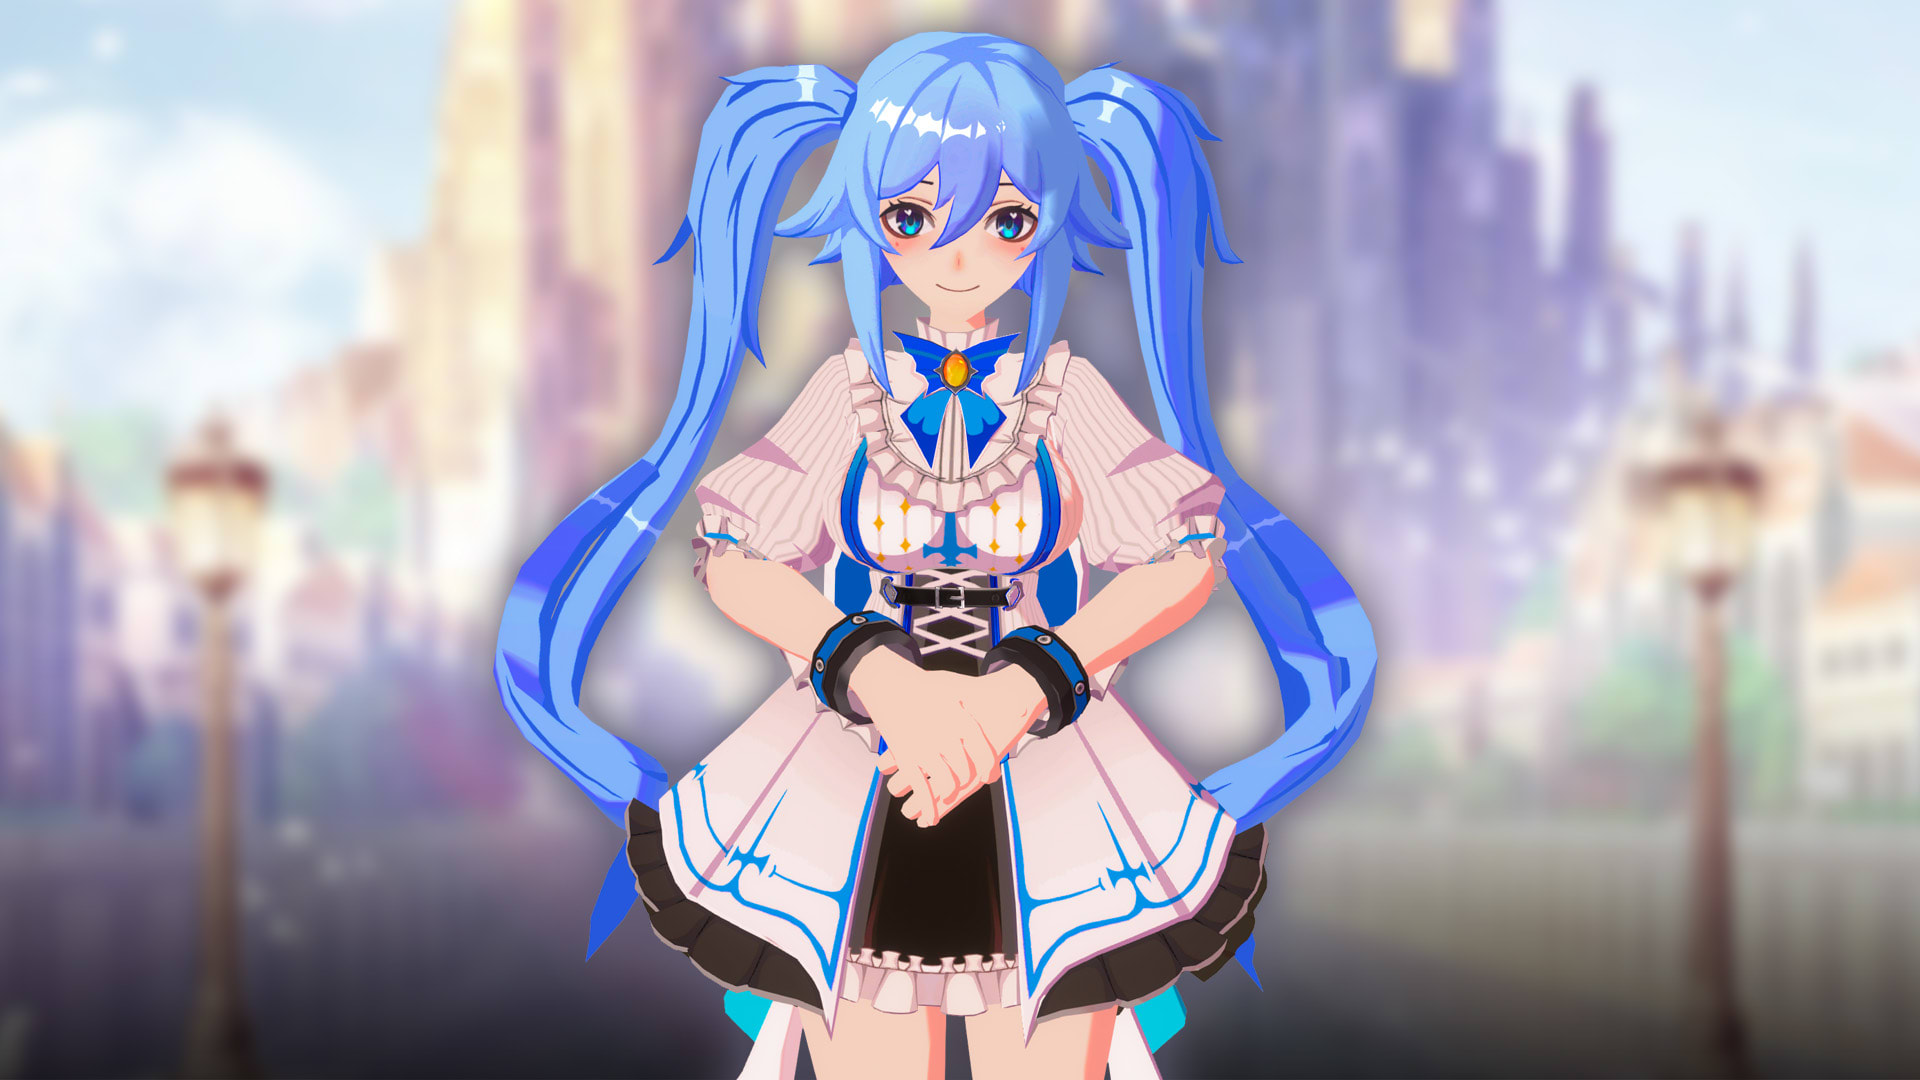 Character Outfit：Soft Maid